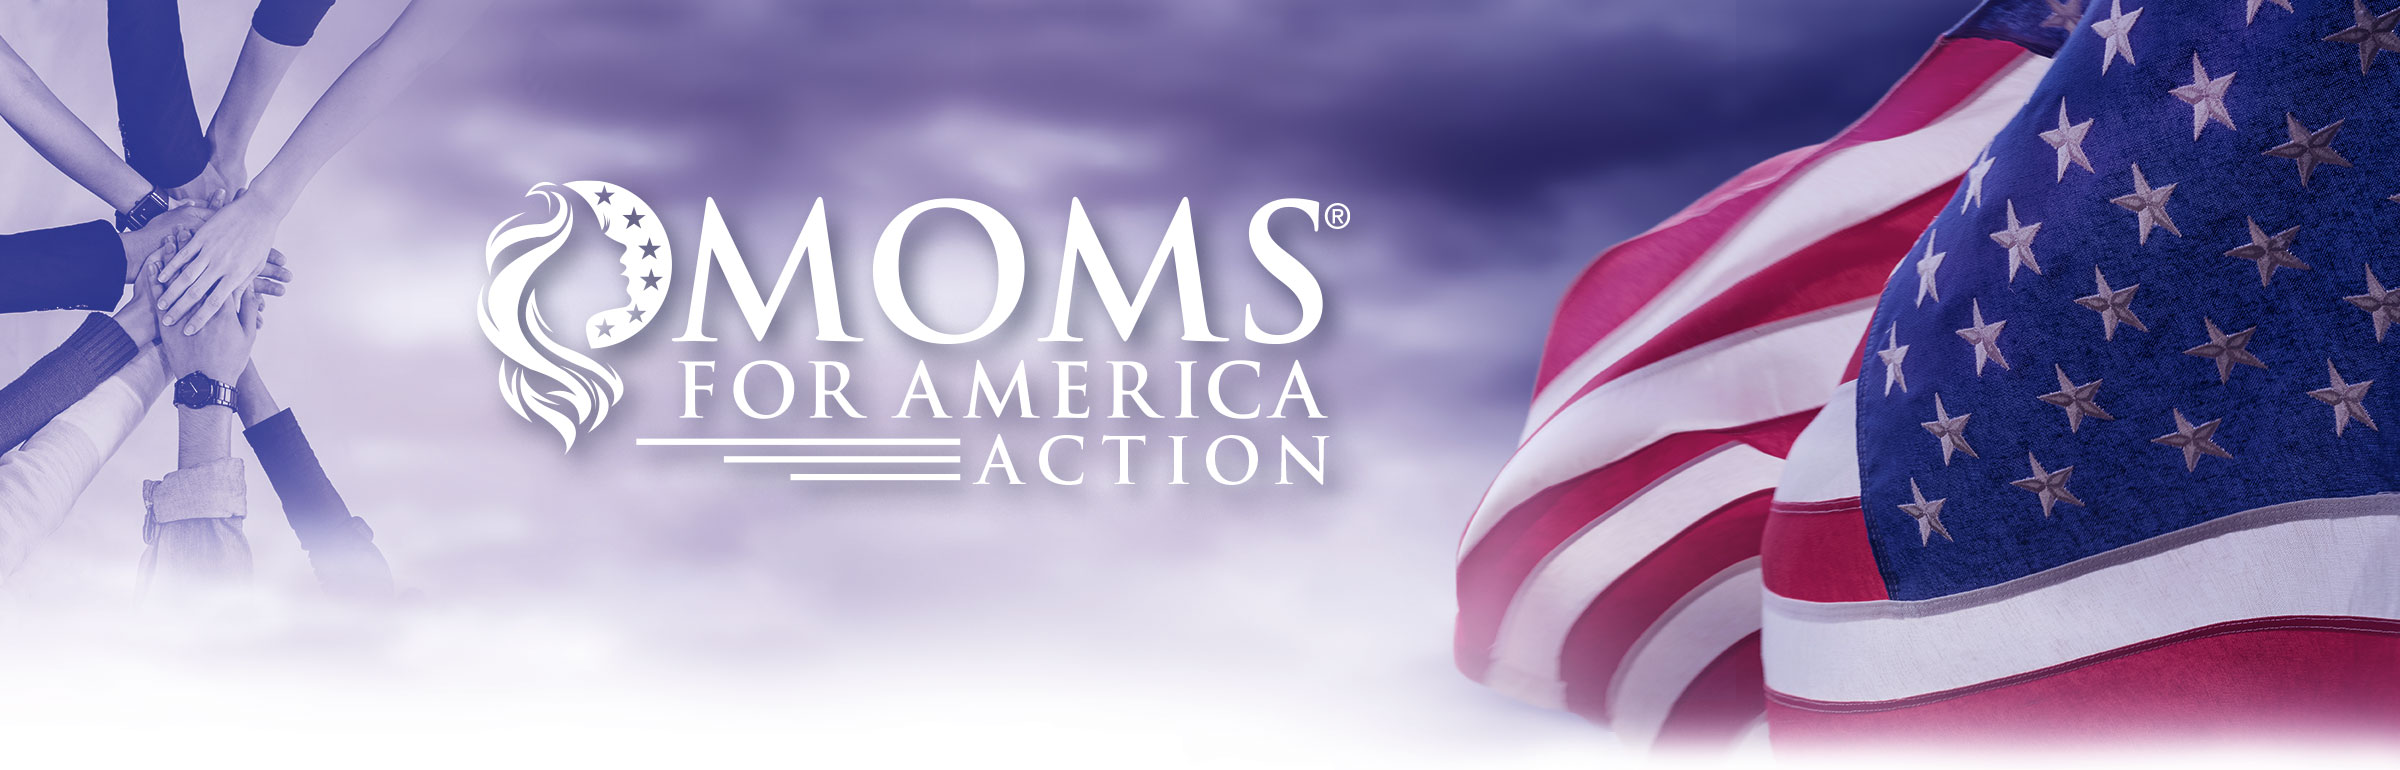 Moms for America Action